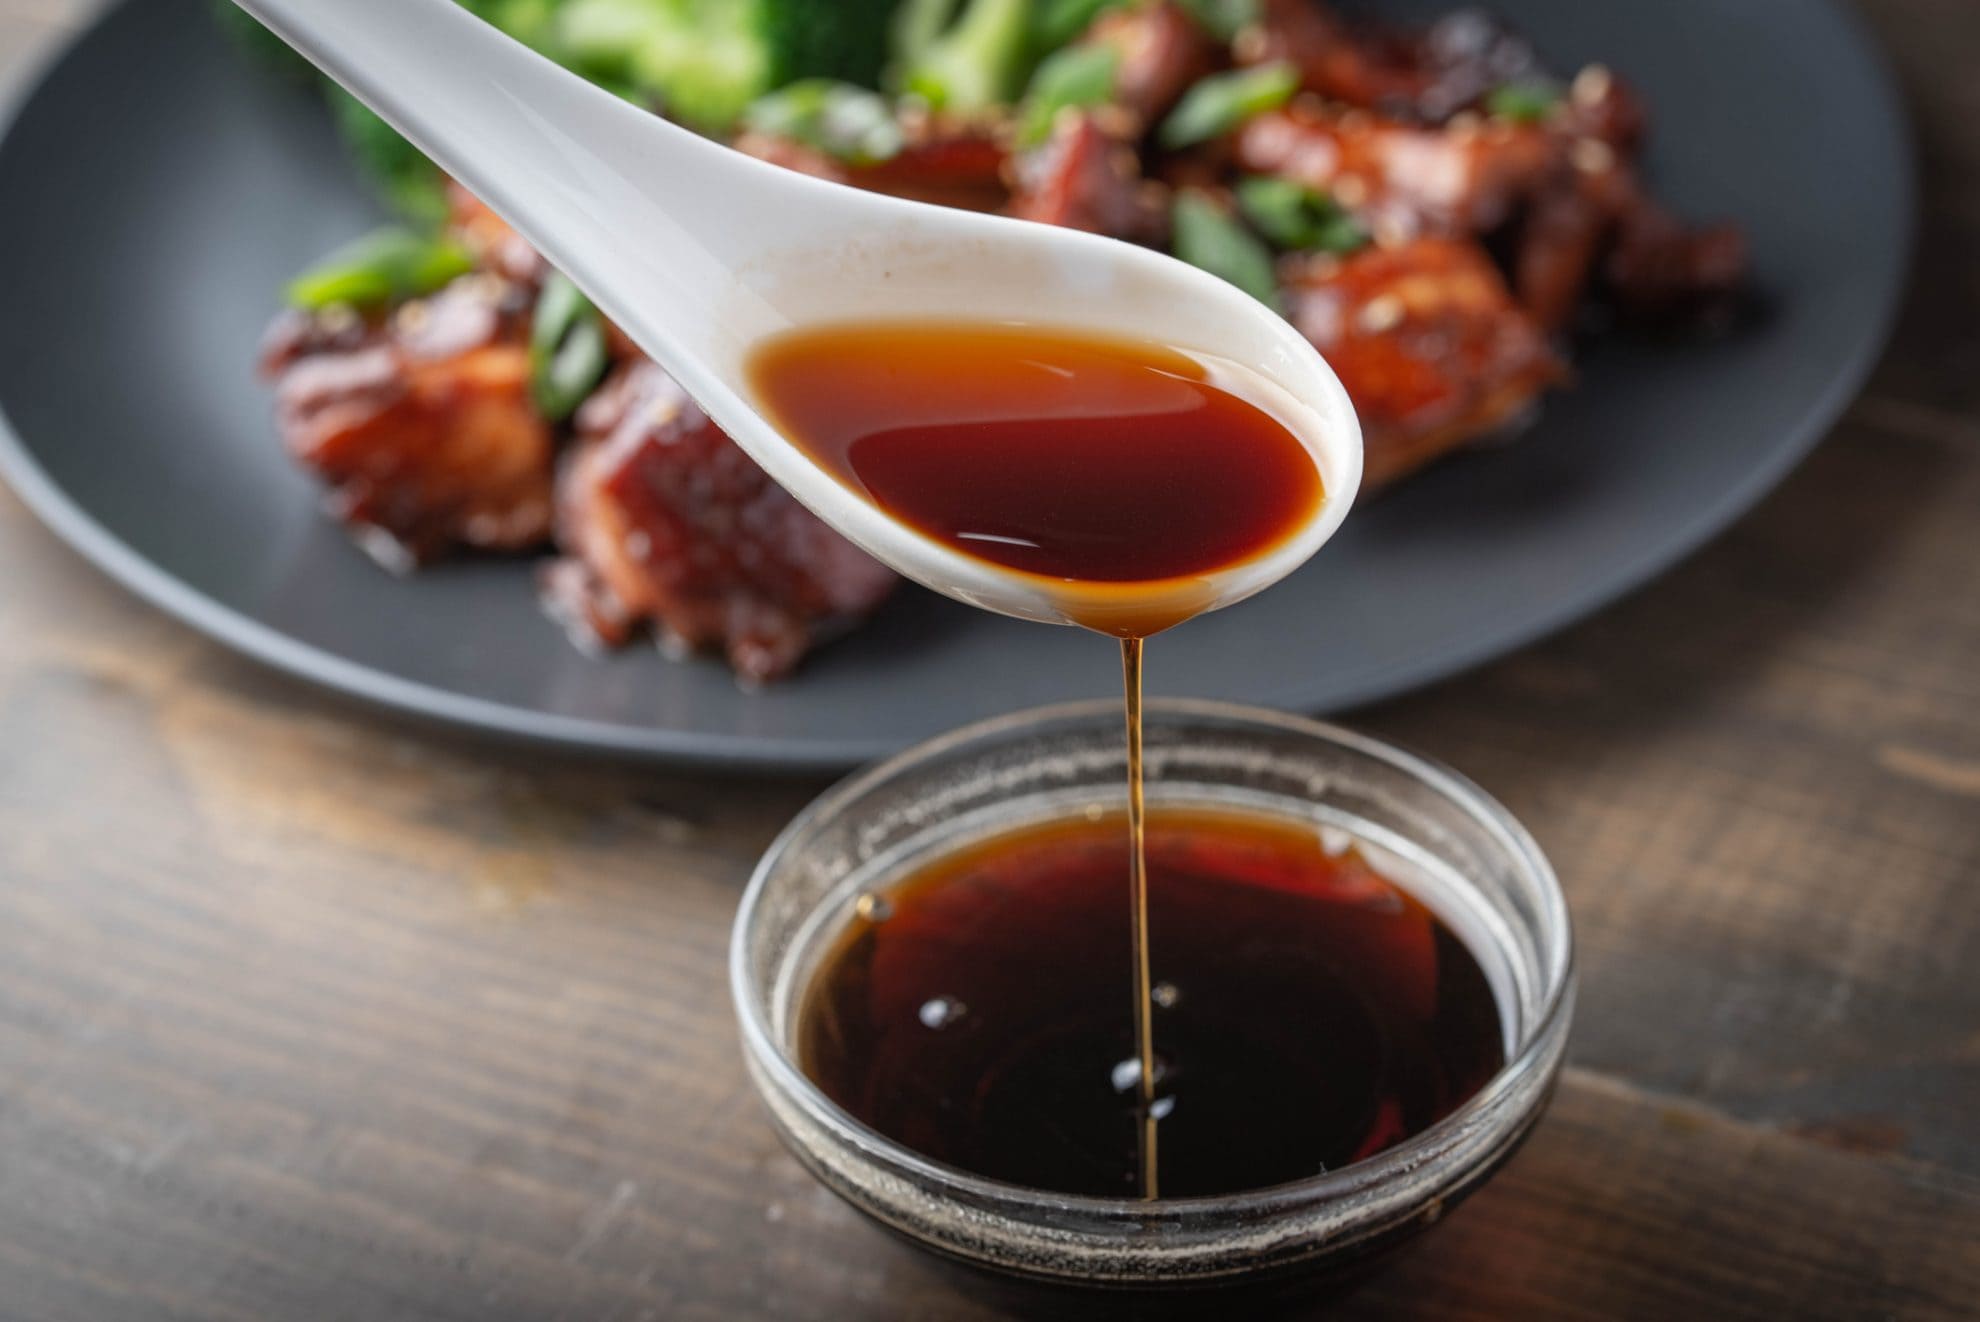 spooning soy sauce out of a small glass bowl